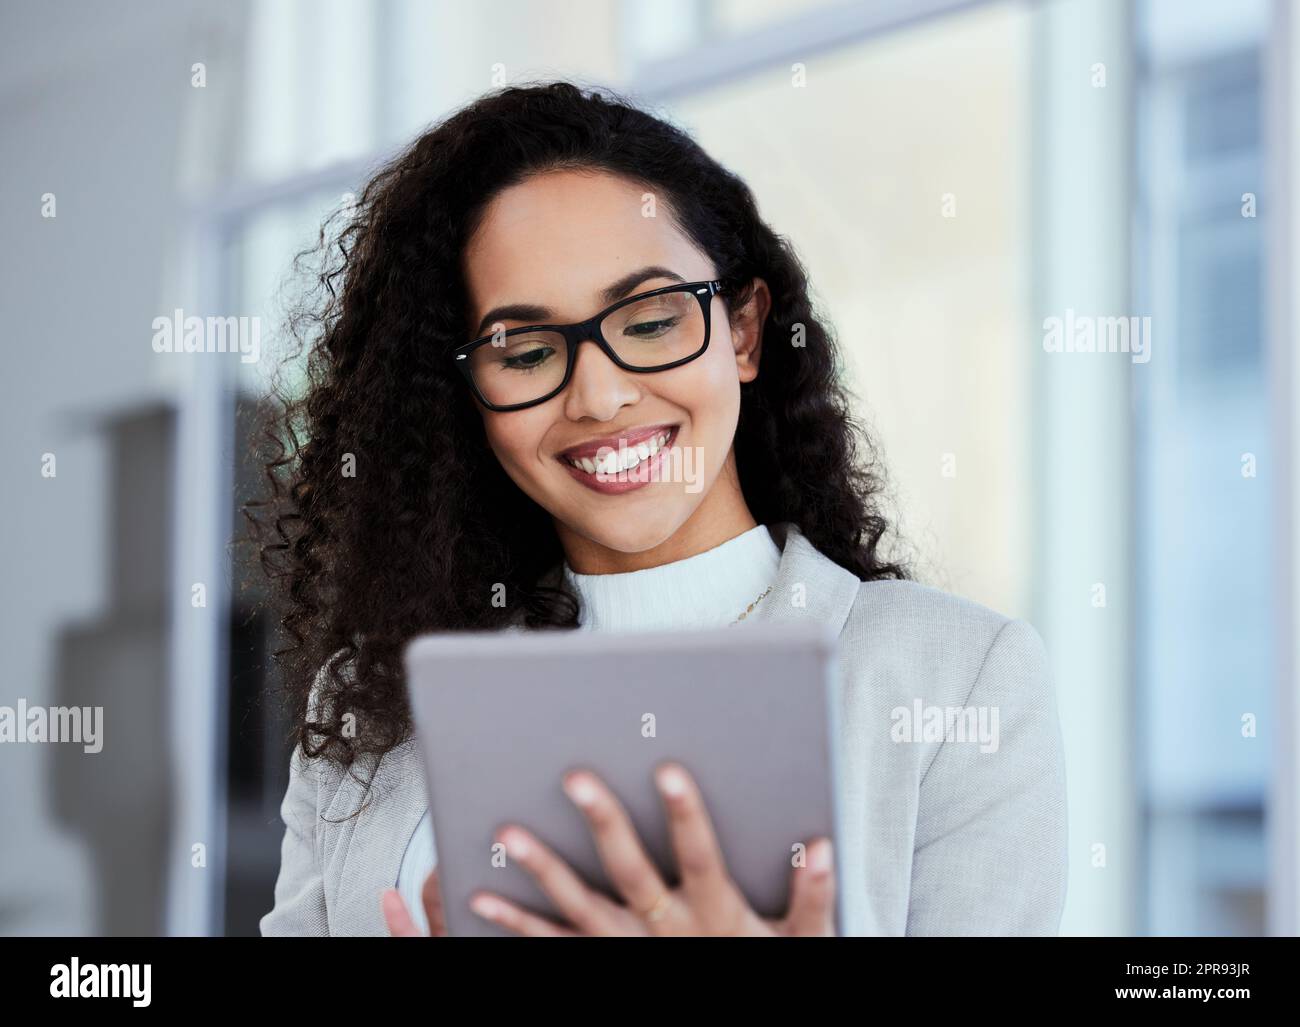 Responding to emails all day. a young businesswoman using her digital tablet. Stock Photo